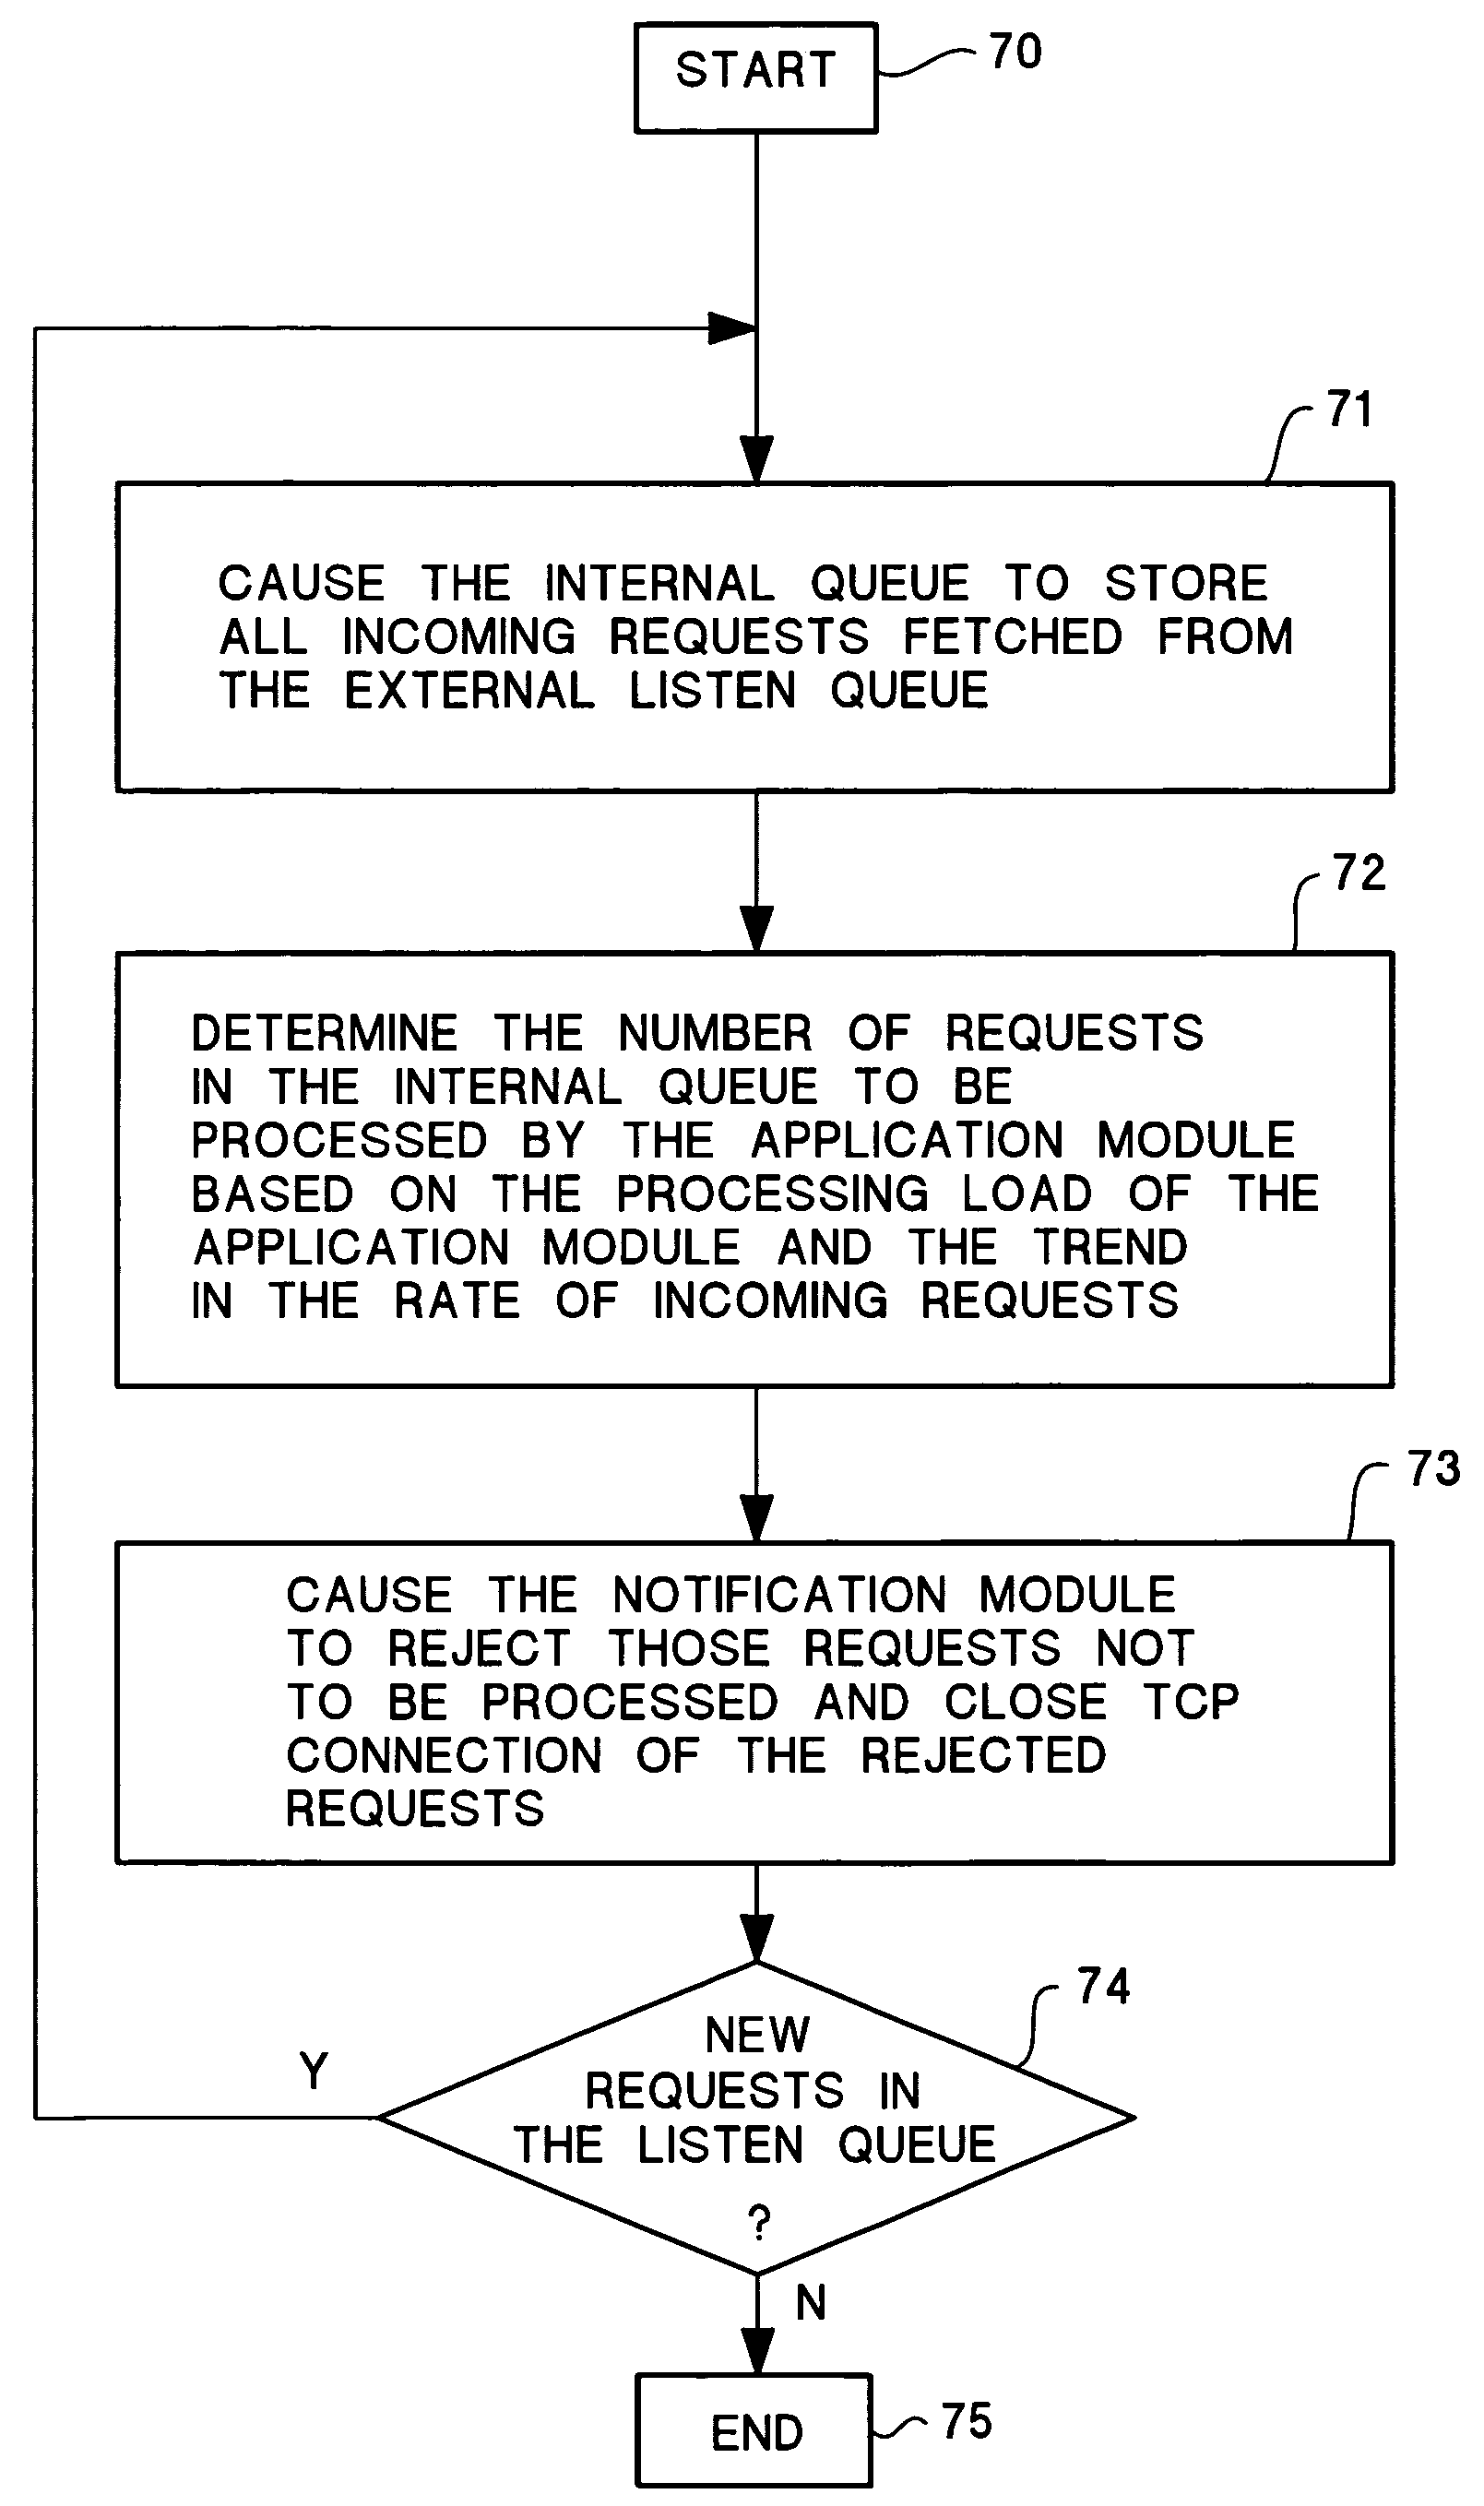 Apparatus and method for processing requests from an external queue in a TCP/IP-based application system